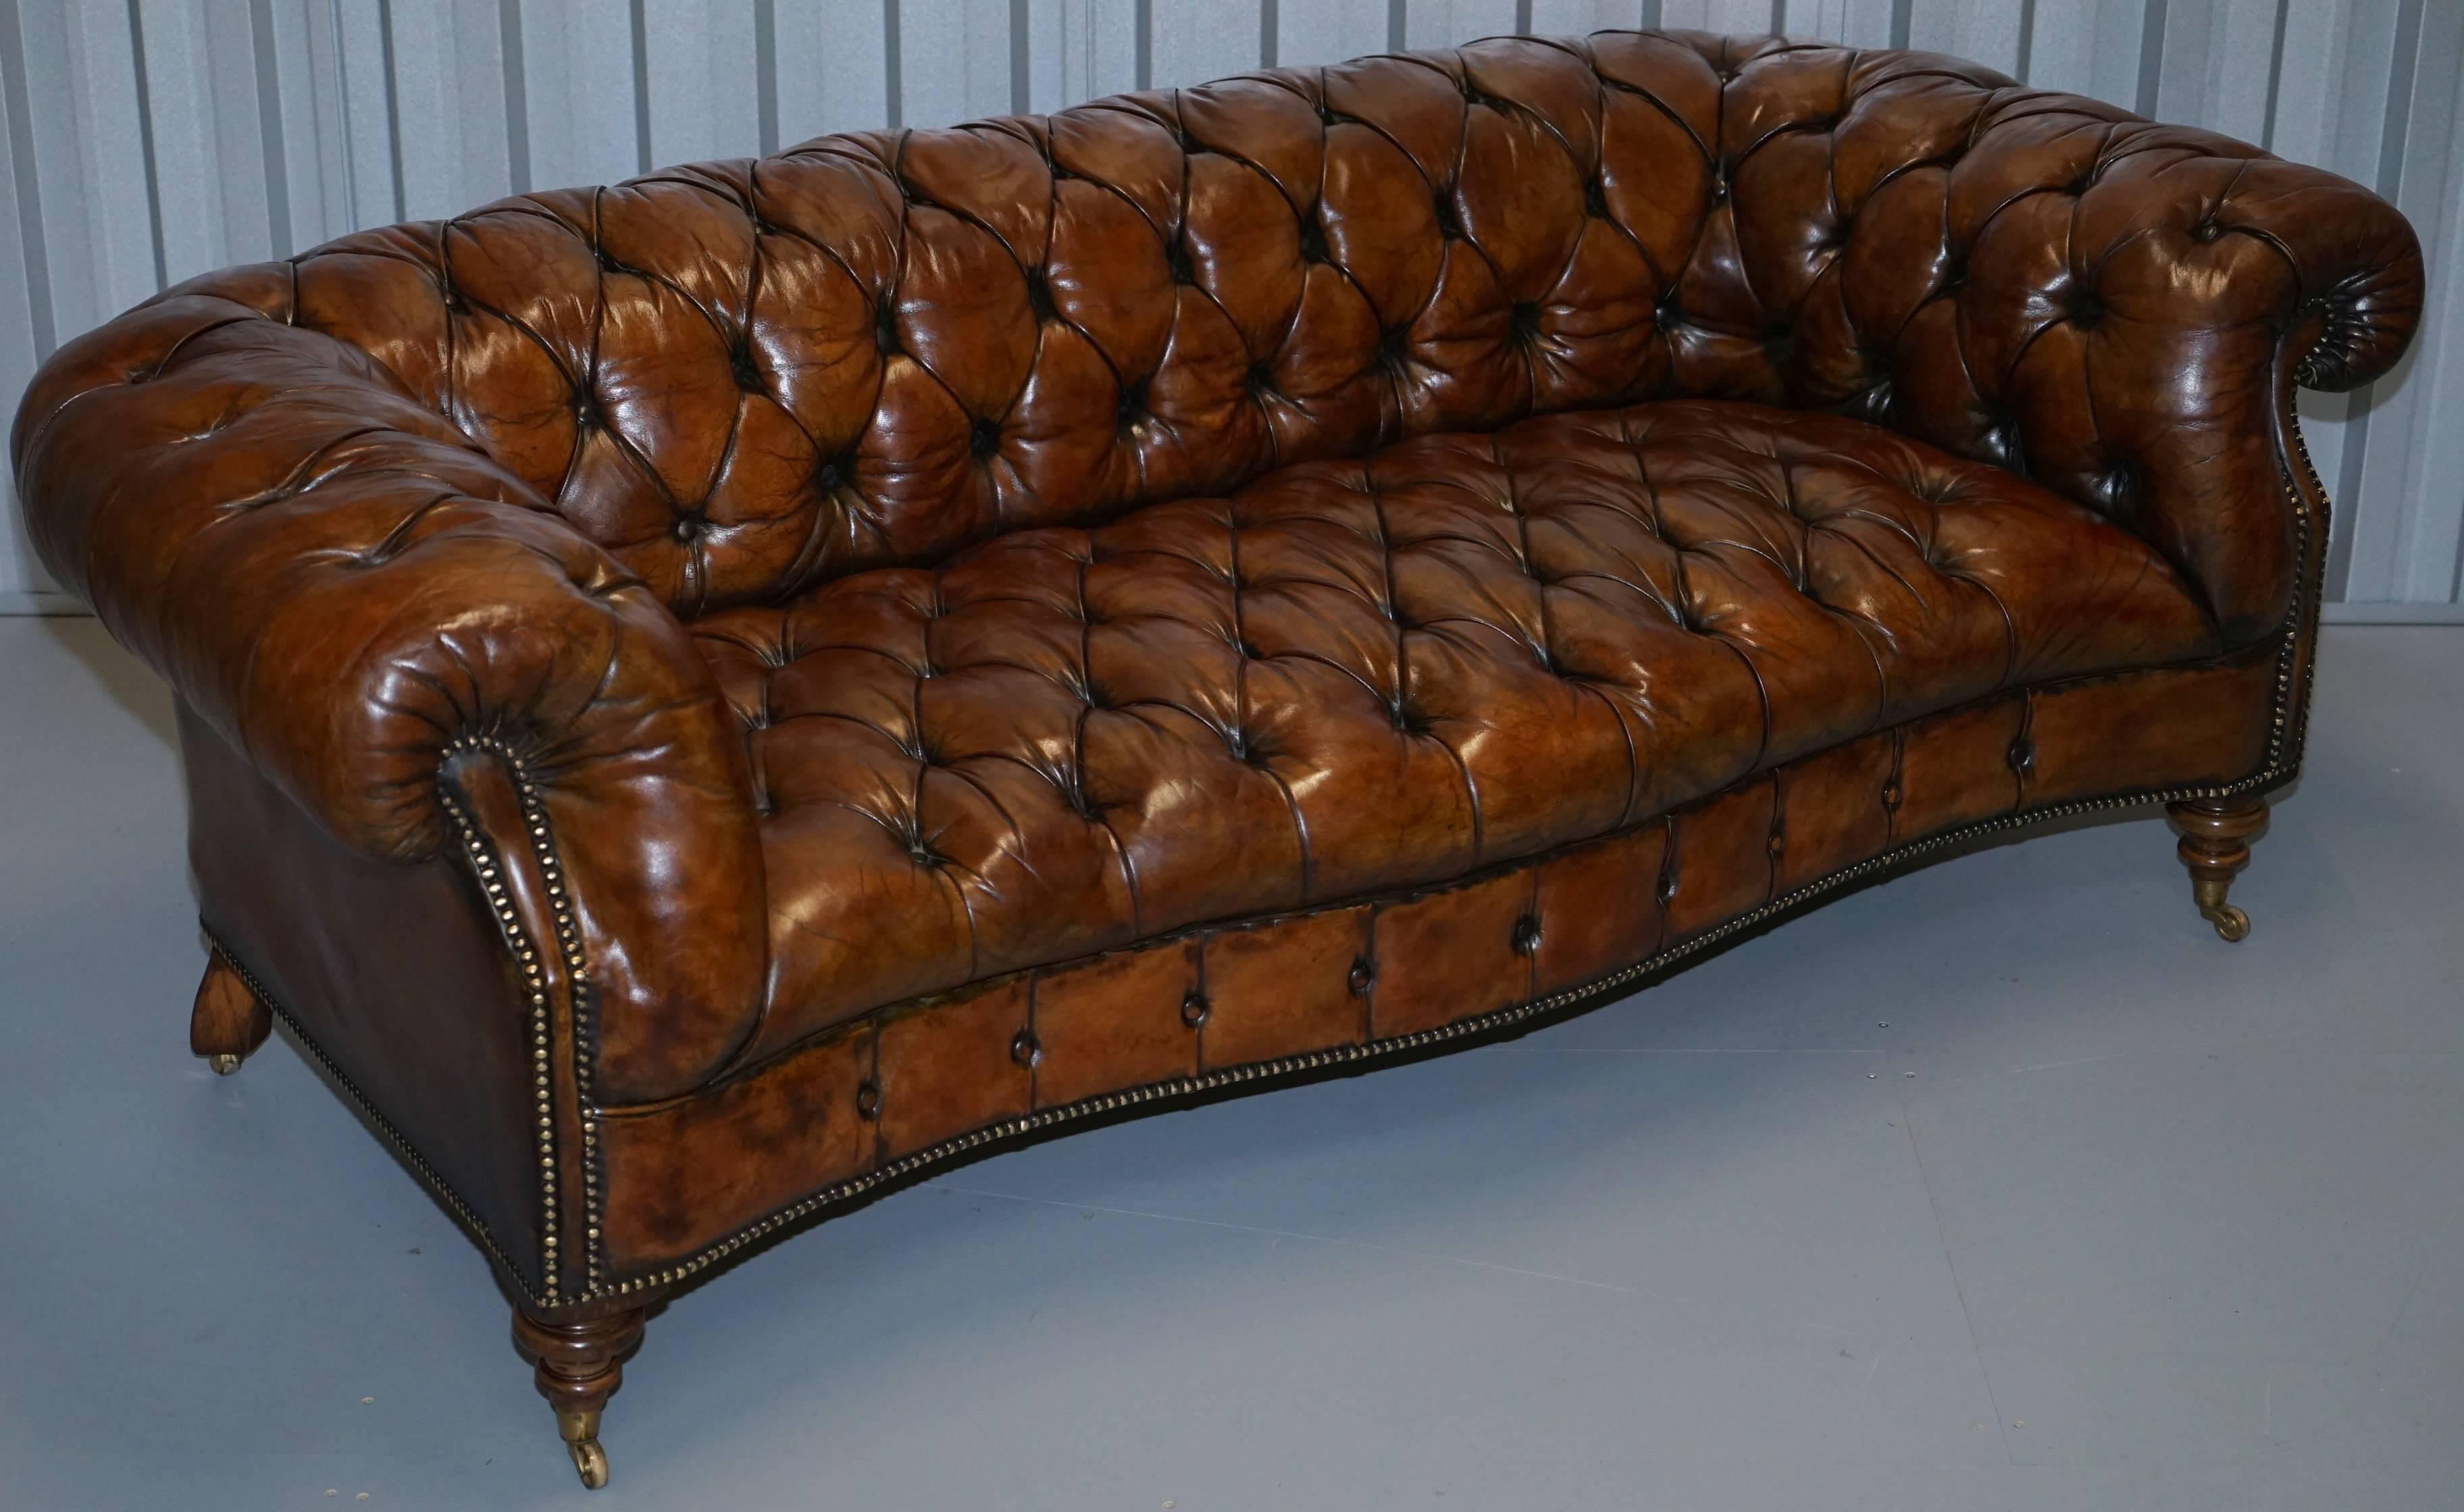 Wimbledon-Furniture

We are delighted to offer for auction this extremely rare pair of original mid Victorian fully restored Howard & Son’s style Chesterfield club sofas in cigar brown leather

The pair were restored in 1967 with the hide